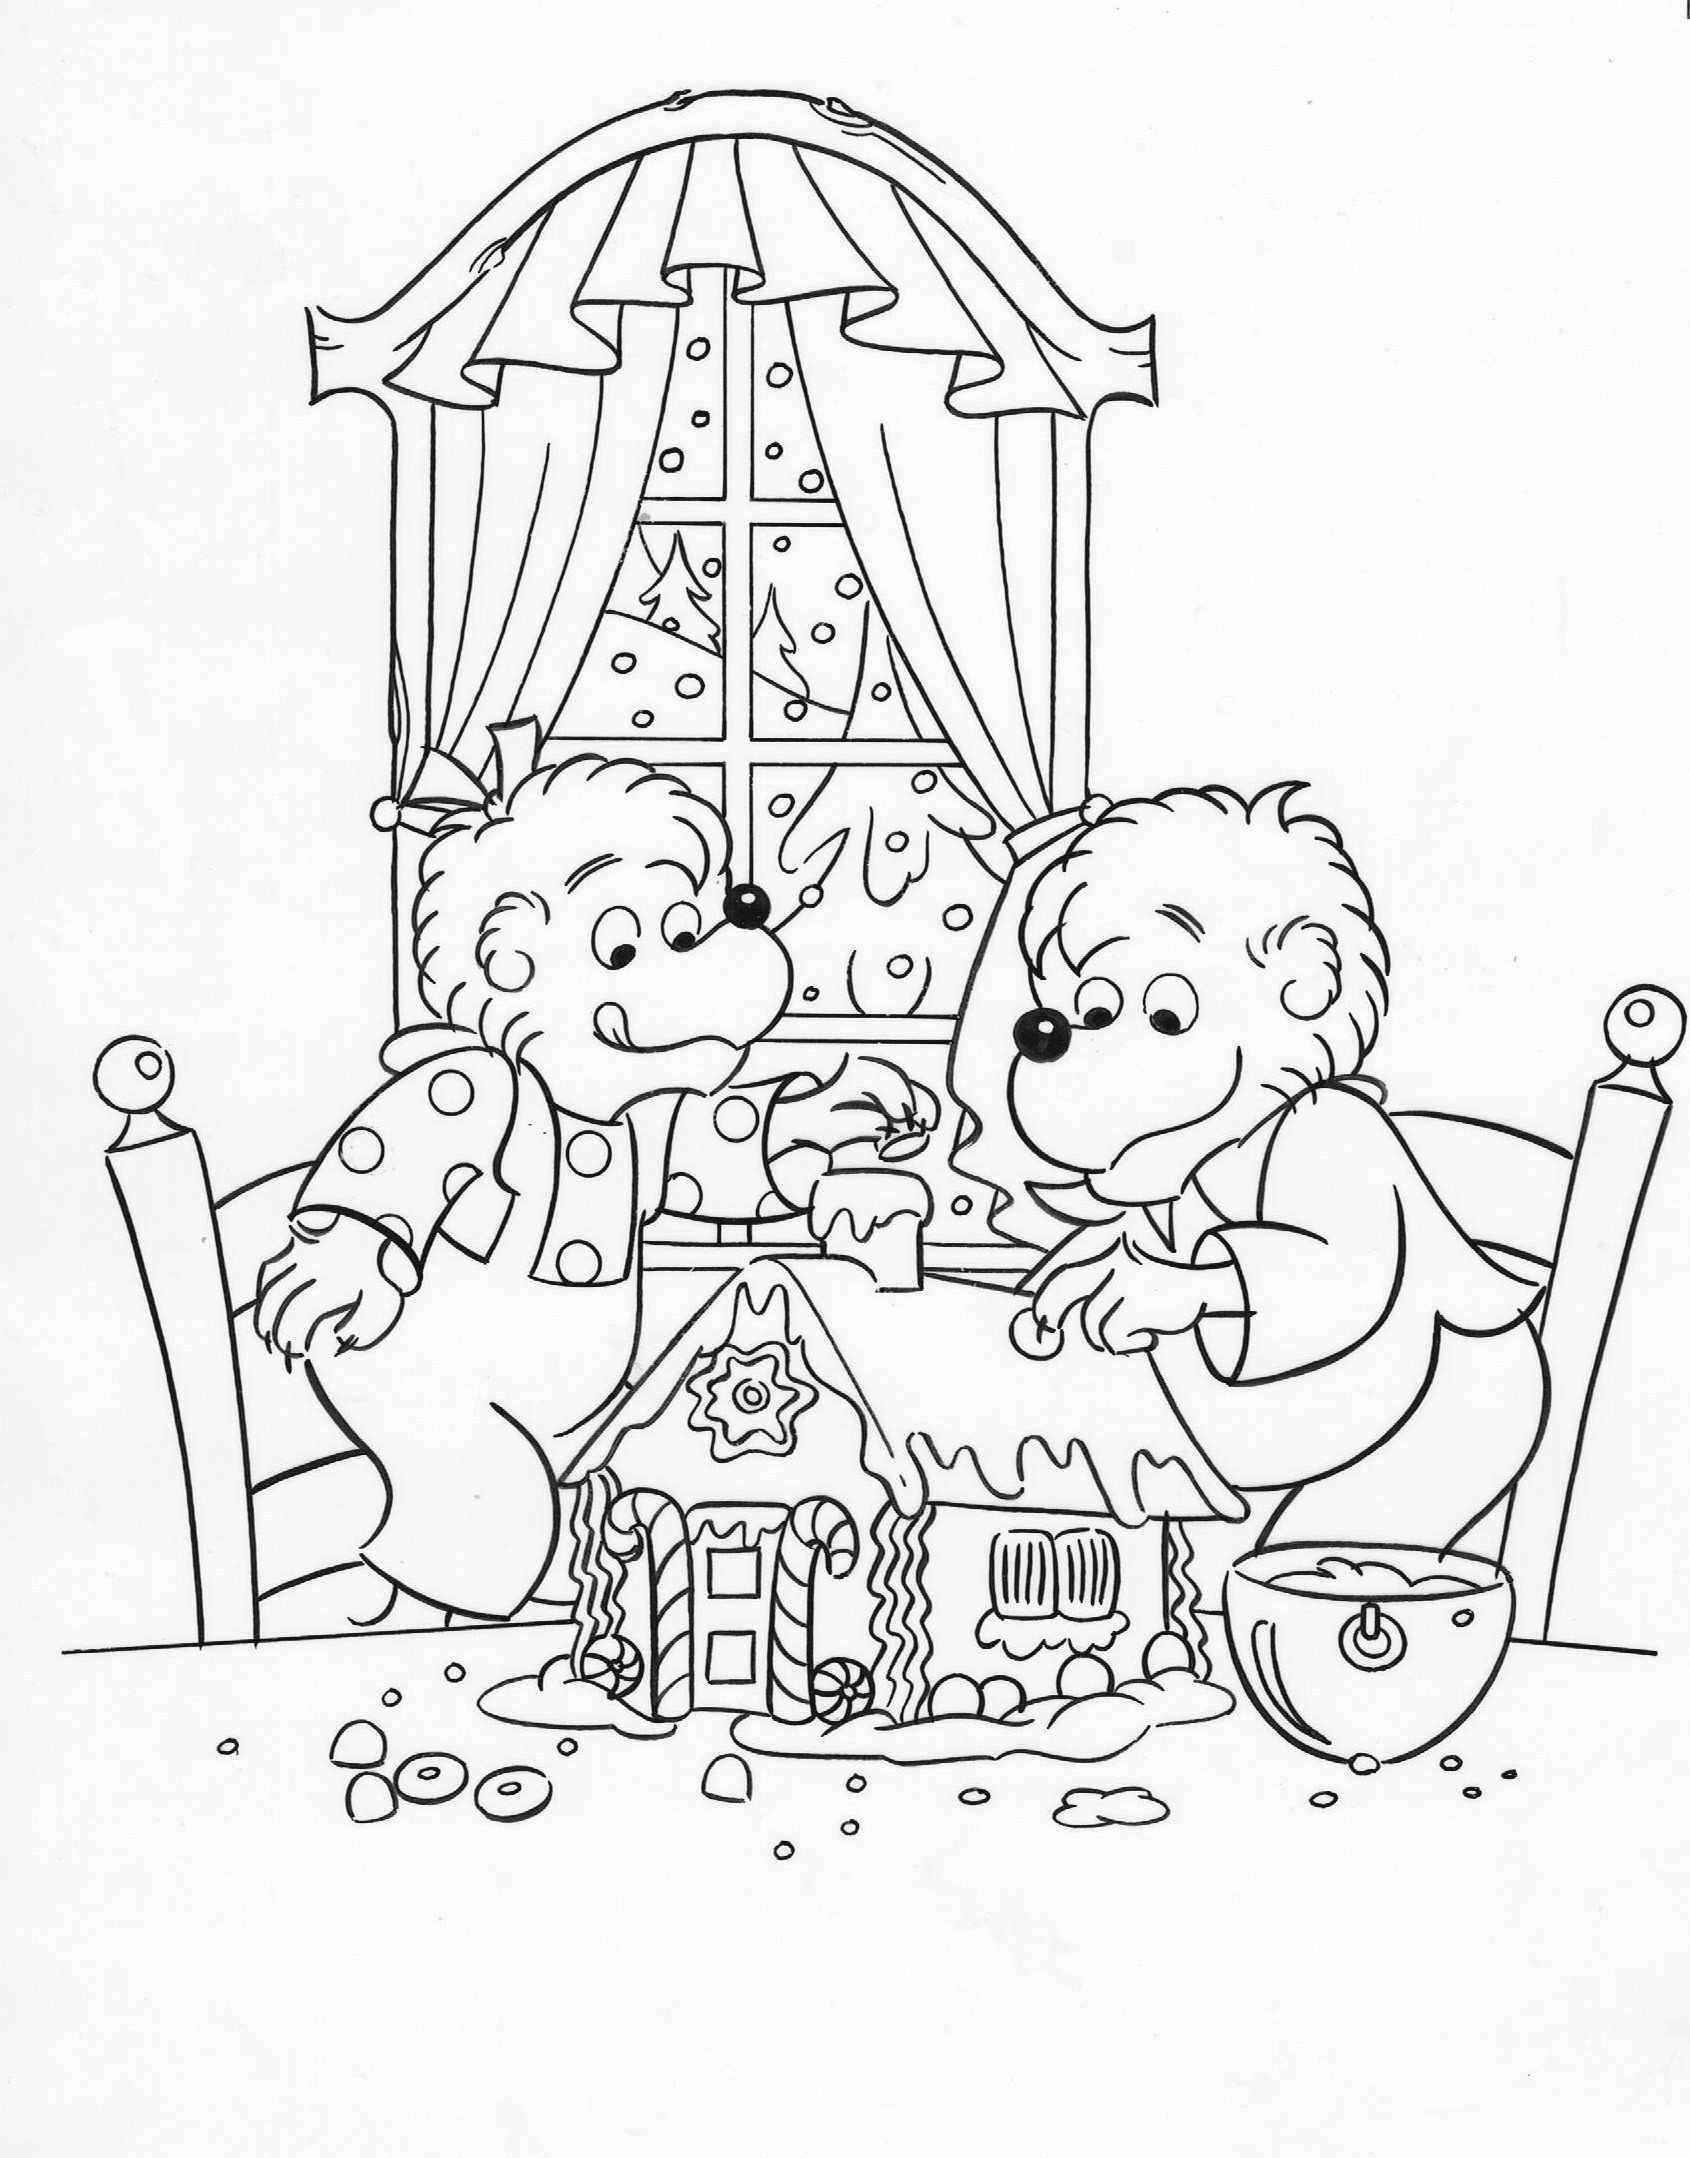 Berenstain Bears Coloring Pages Berenstain Bears Coloring Pages Inspirational Care Bear Coloring